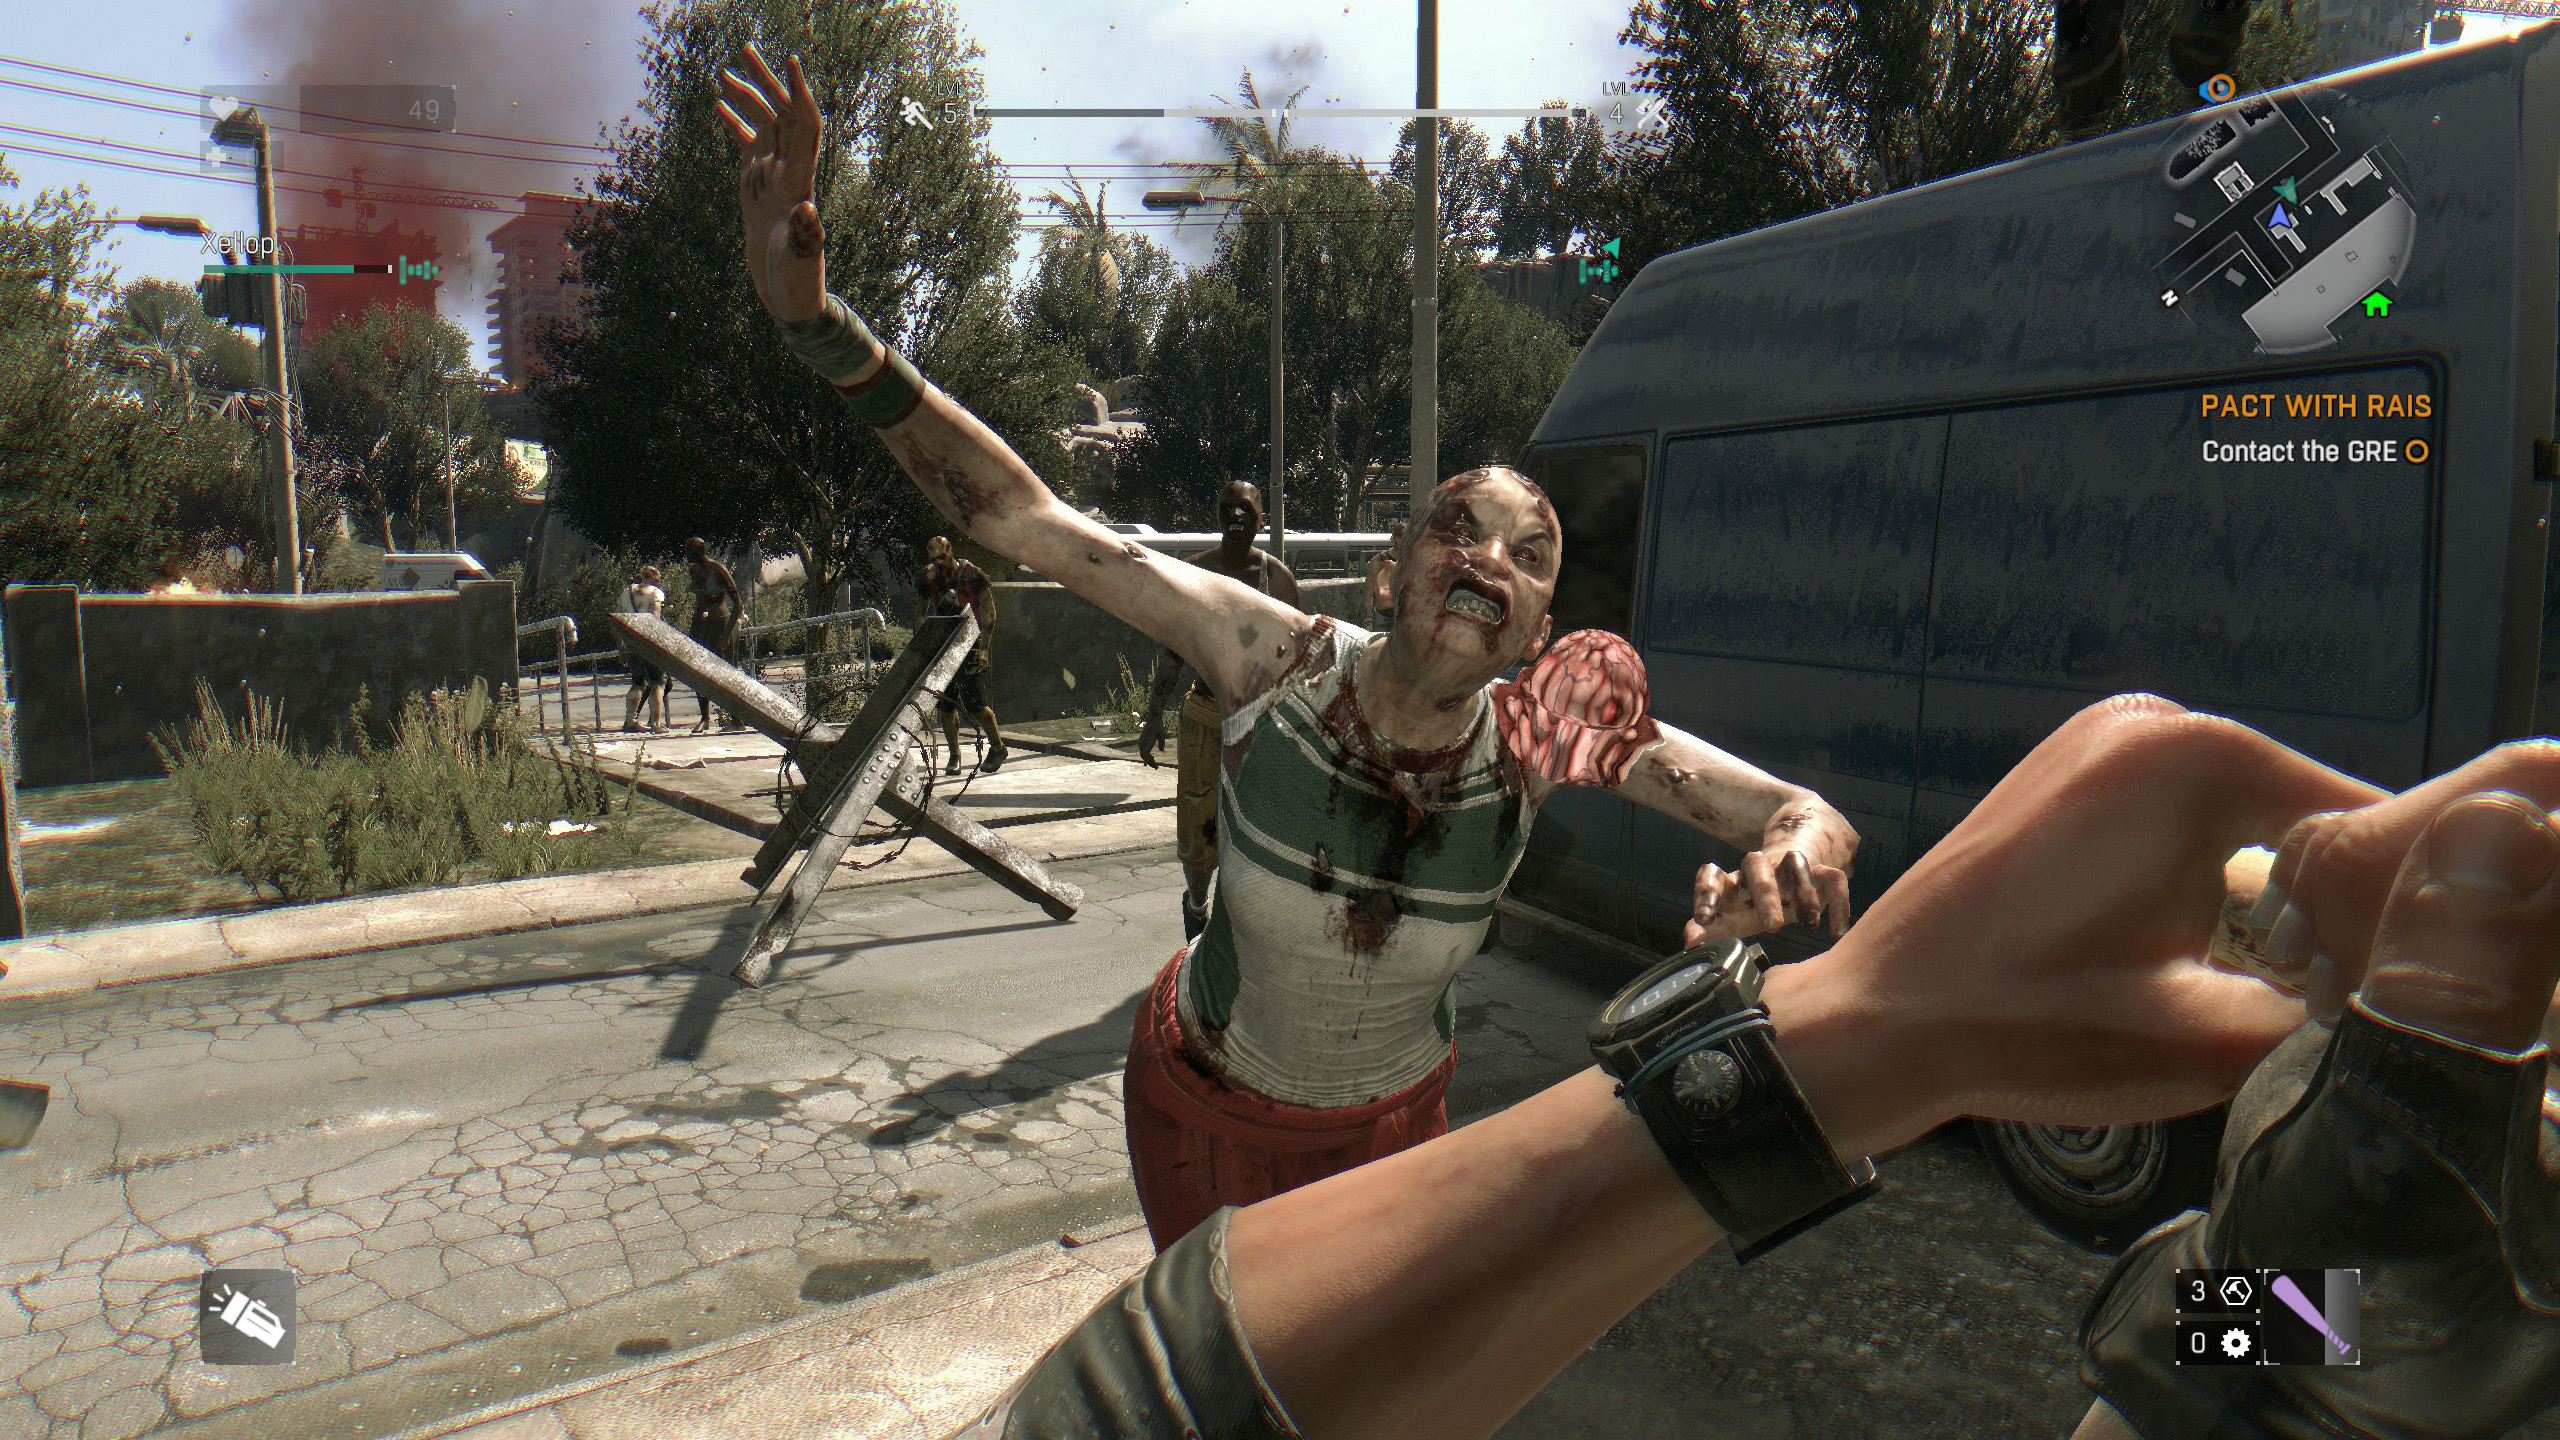 dying light review full cleared